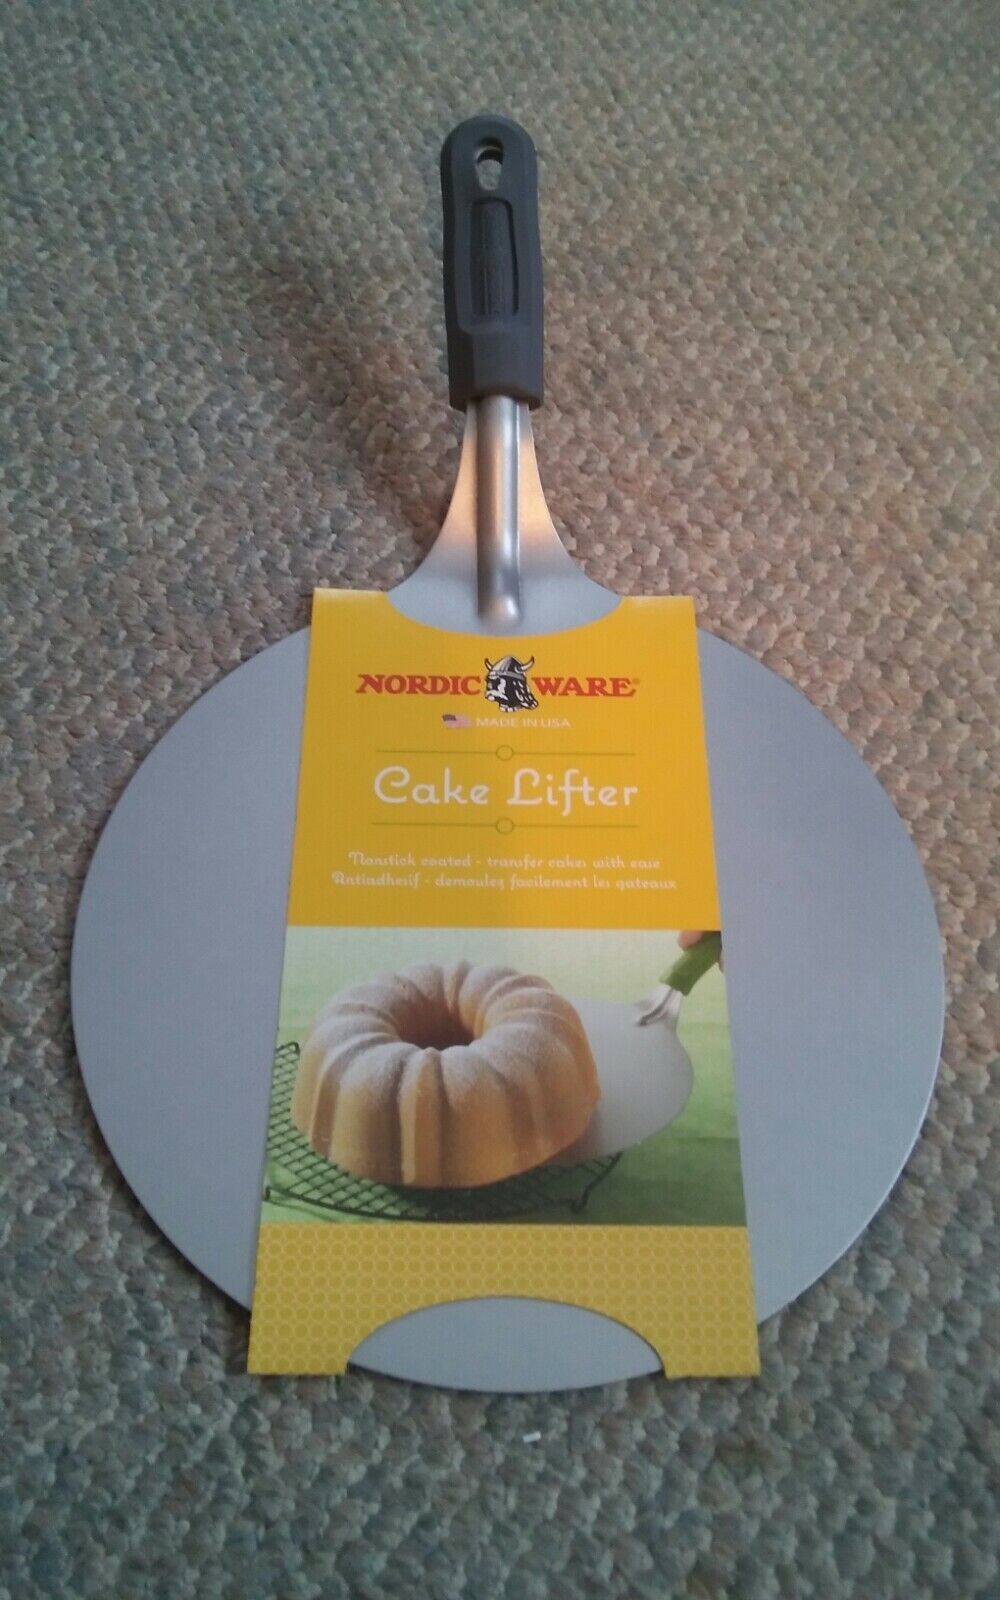 New Nordic Ware Cake Lifter Nonstick Coated - $15.99